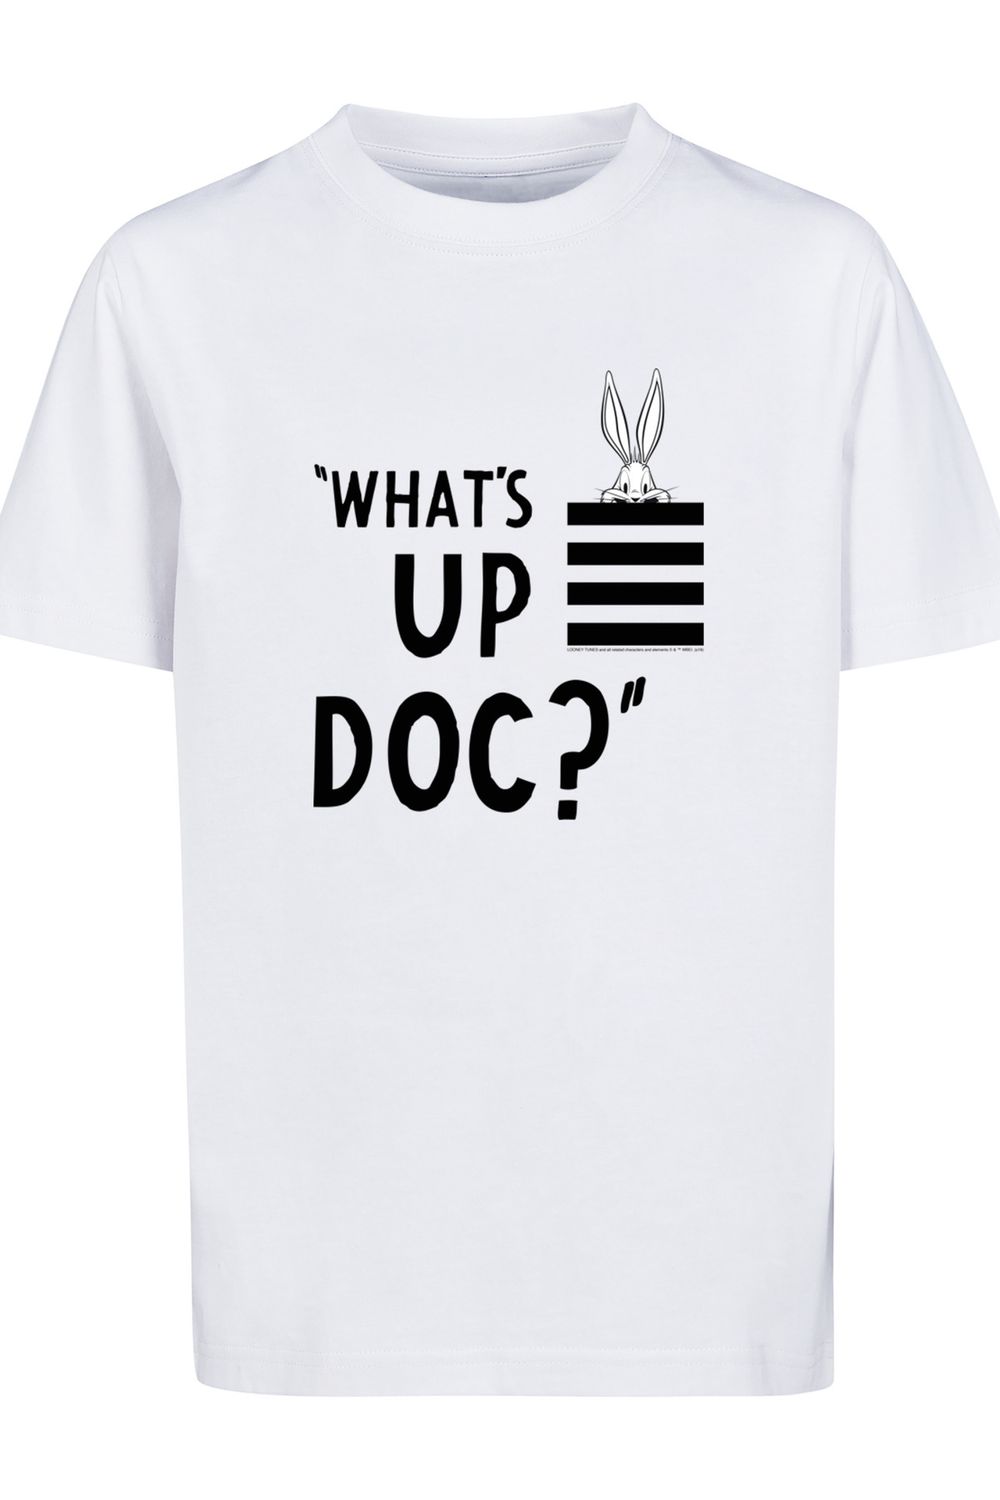 Bugs Up T-Shirt Stripes-WHT Trendyol Kids Doc Tunes What\'s - Looney F4NT4STIC Basic mit Kinder Bunny